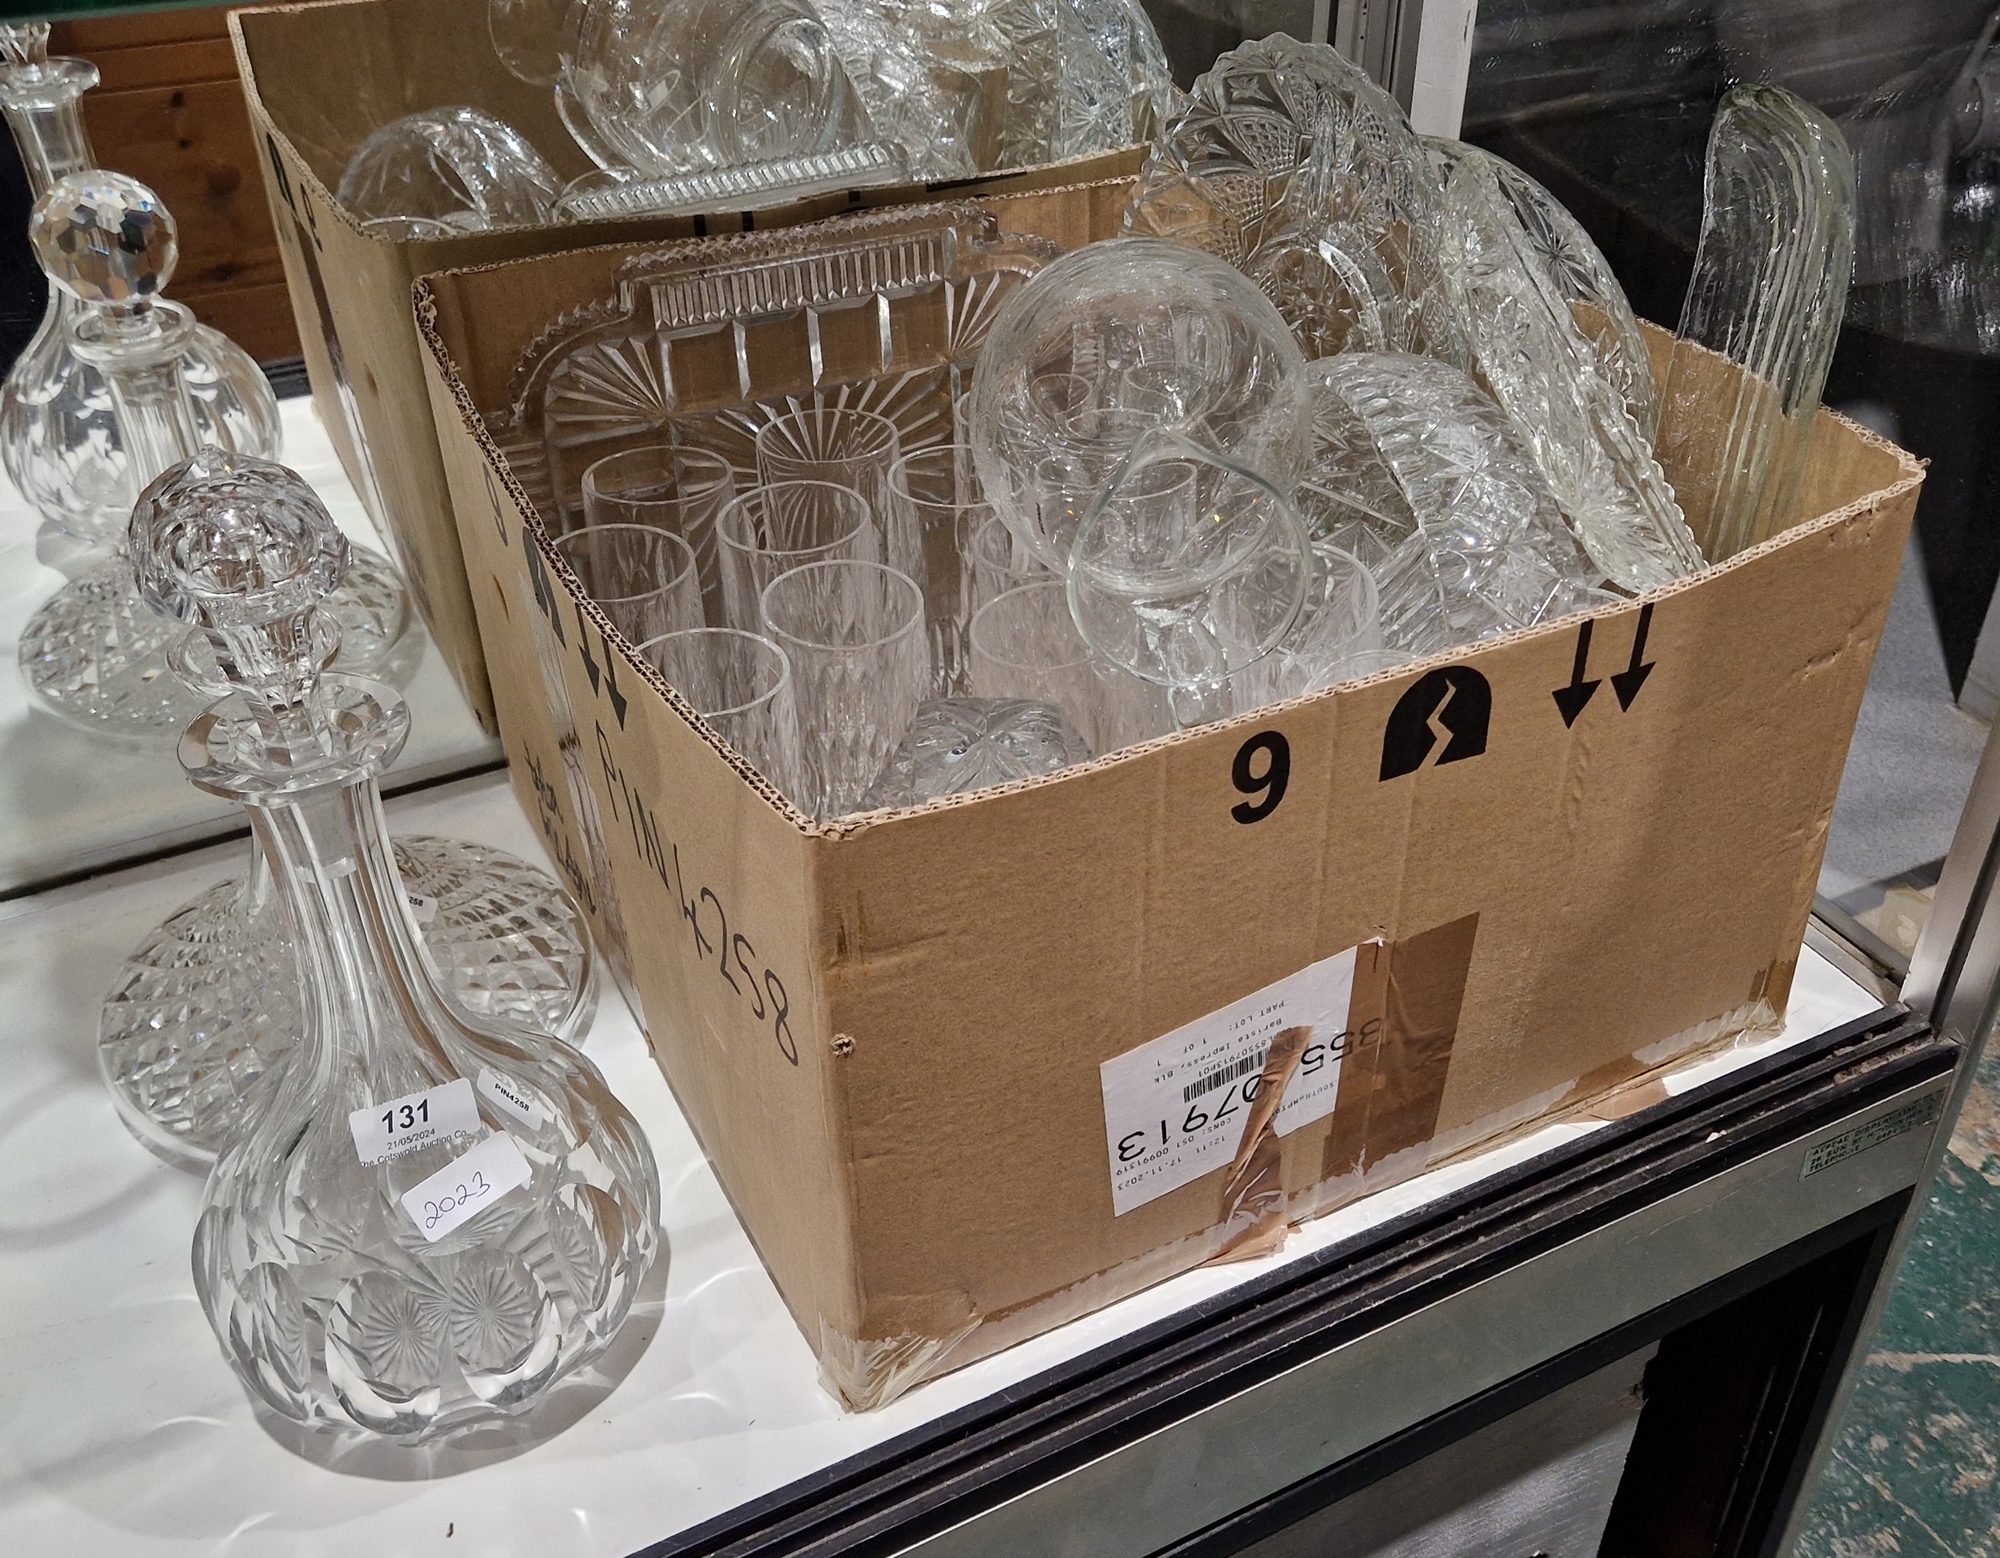 Large collection of cut glassware including a shaft and globe shaped decanter and stopper, cut